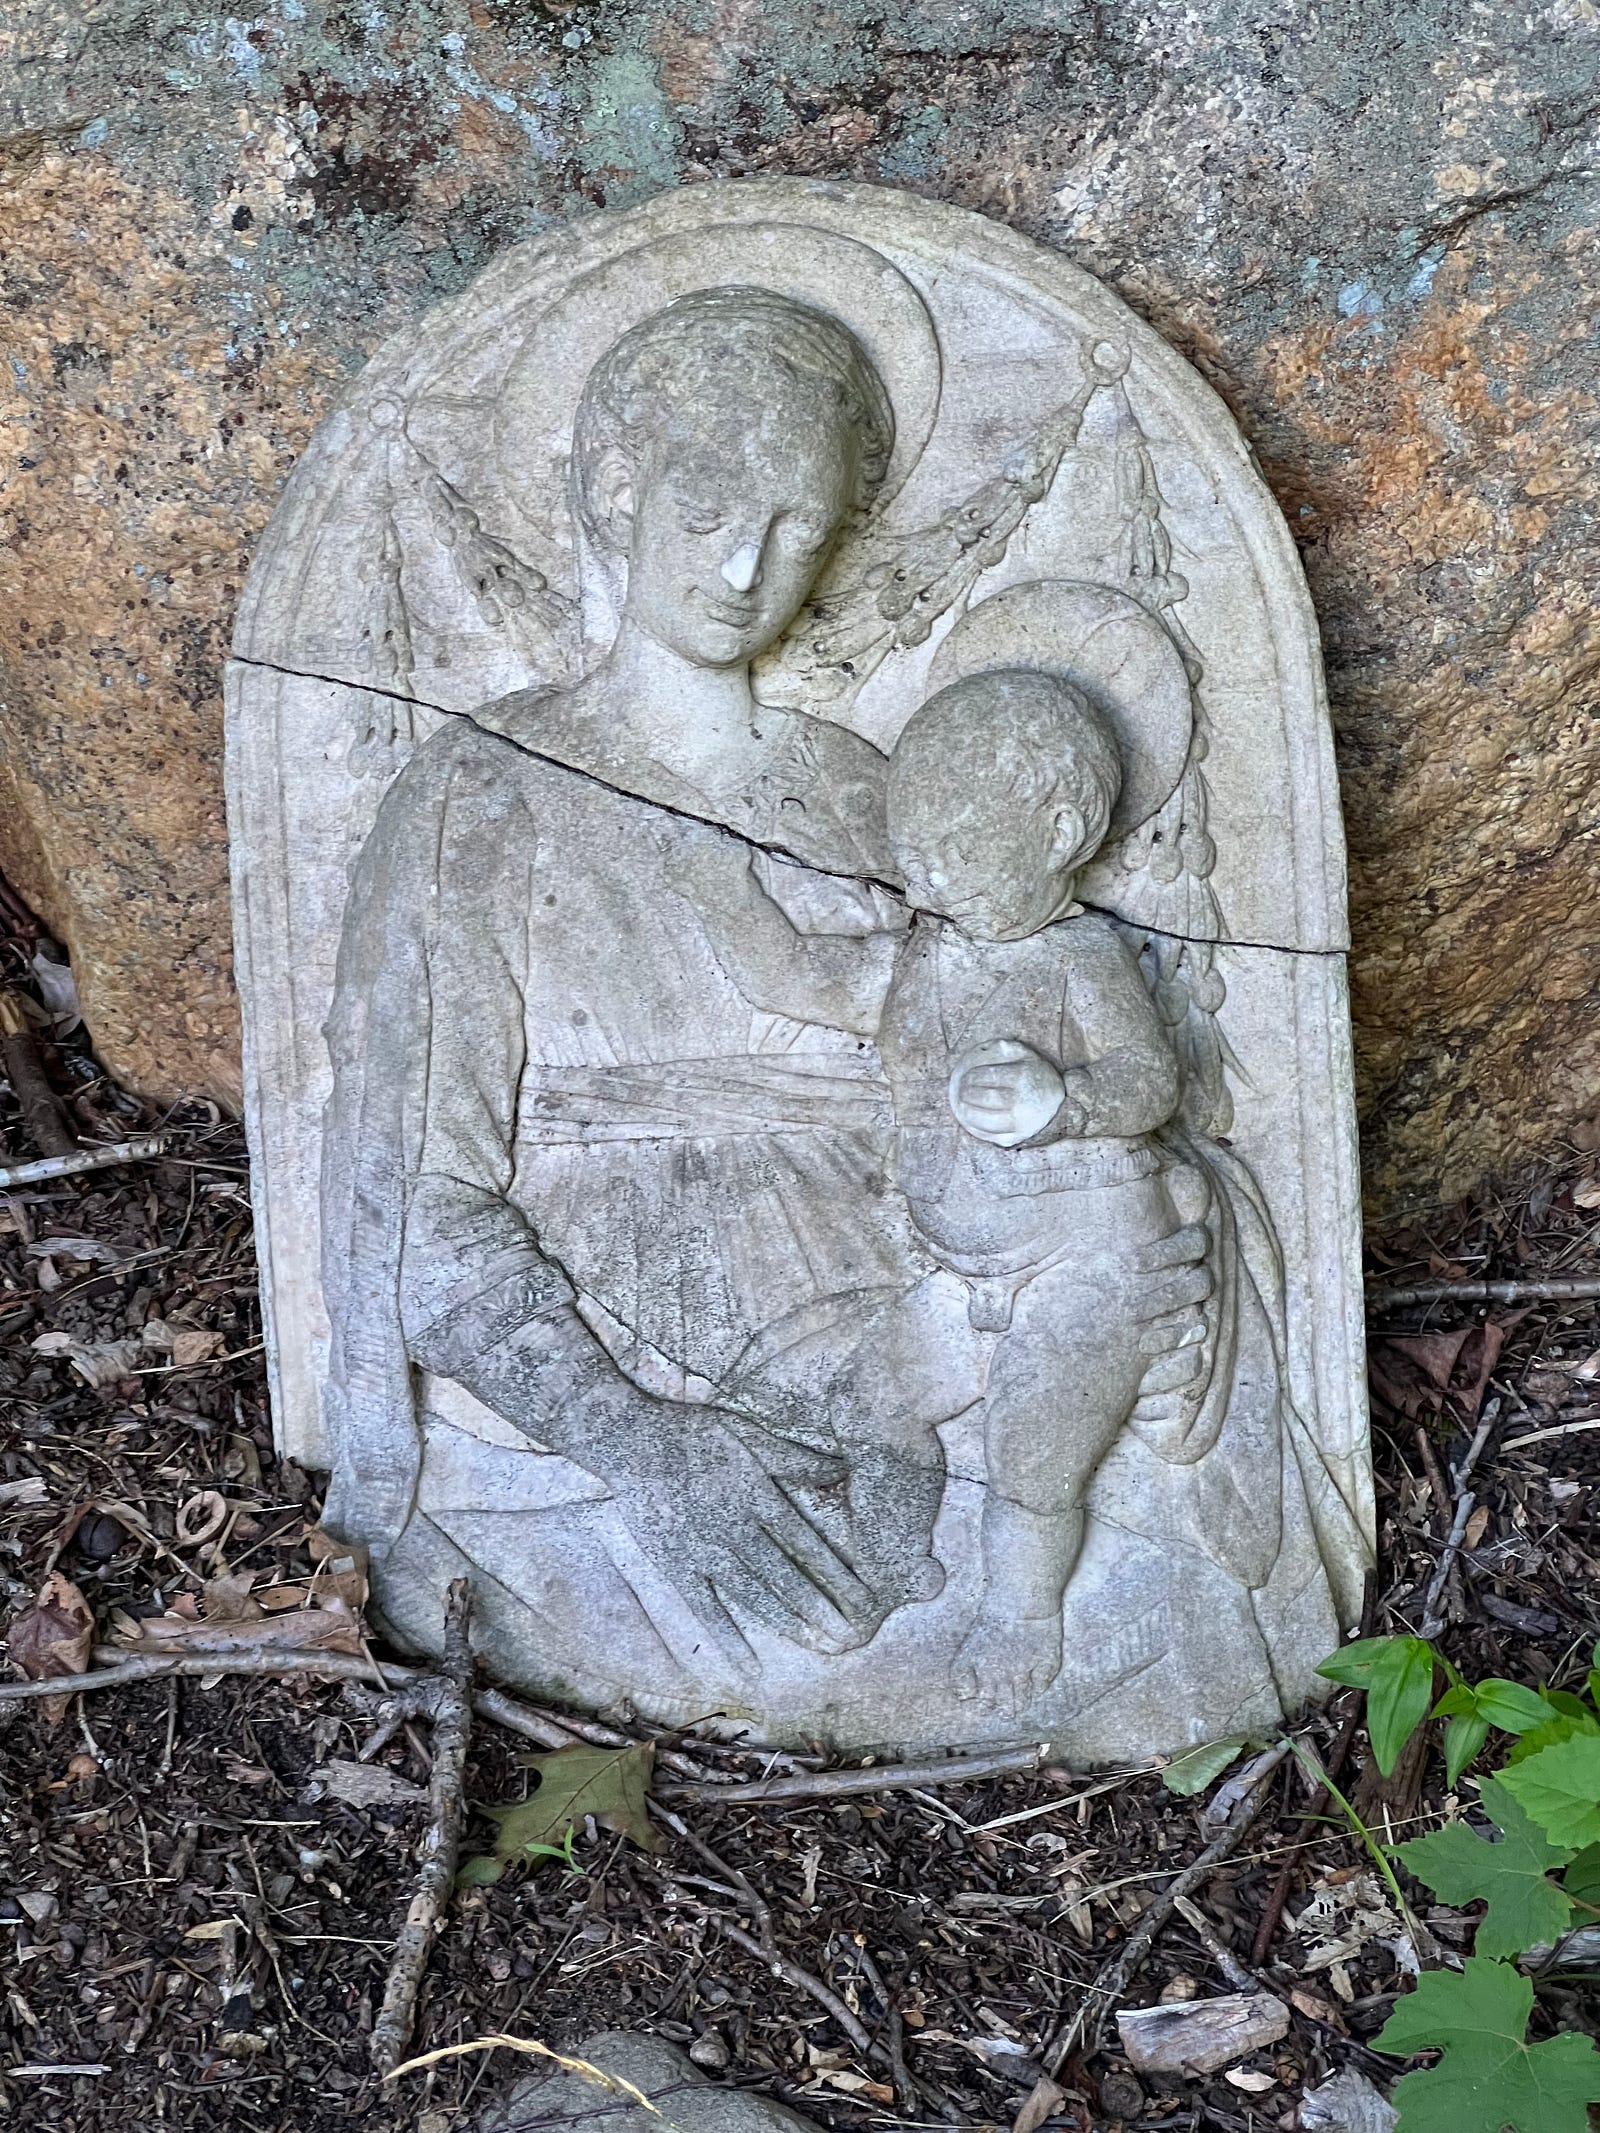 Photo of a stone madonna and child in an outdoor church garden. Both characters have the holy nimbus, or halo, behind their heads.